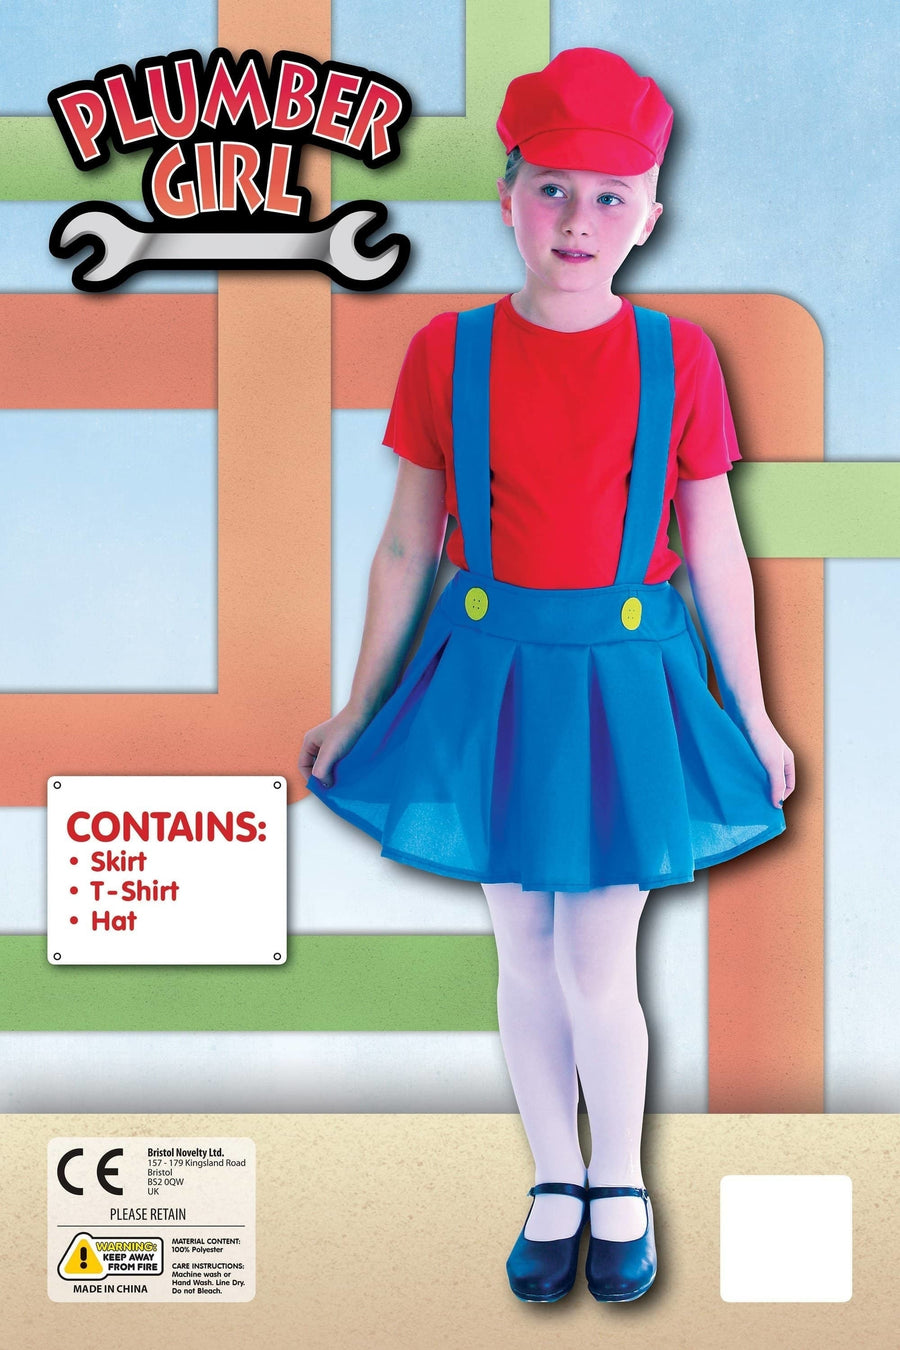 Plumbers Girl Red Large Childrens Costume Female_1